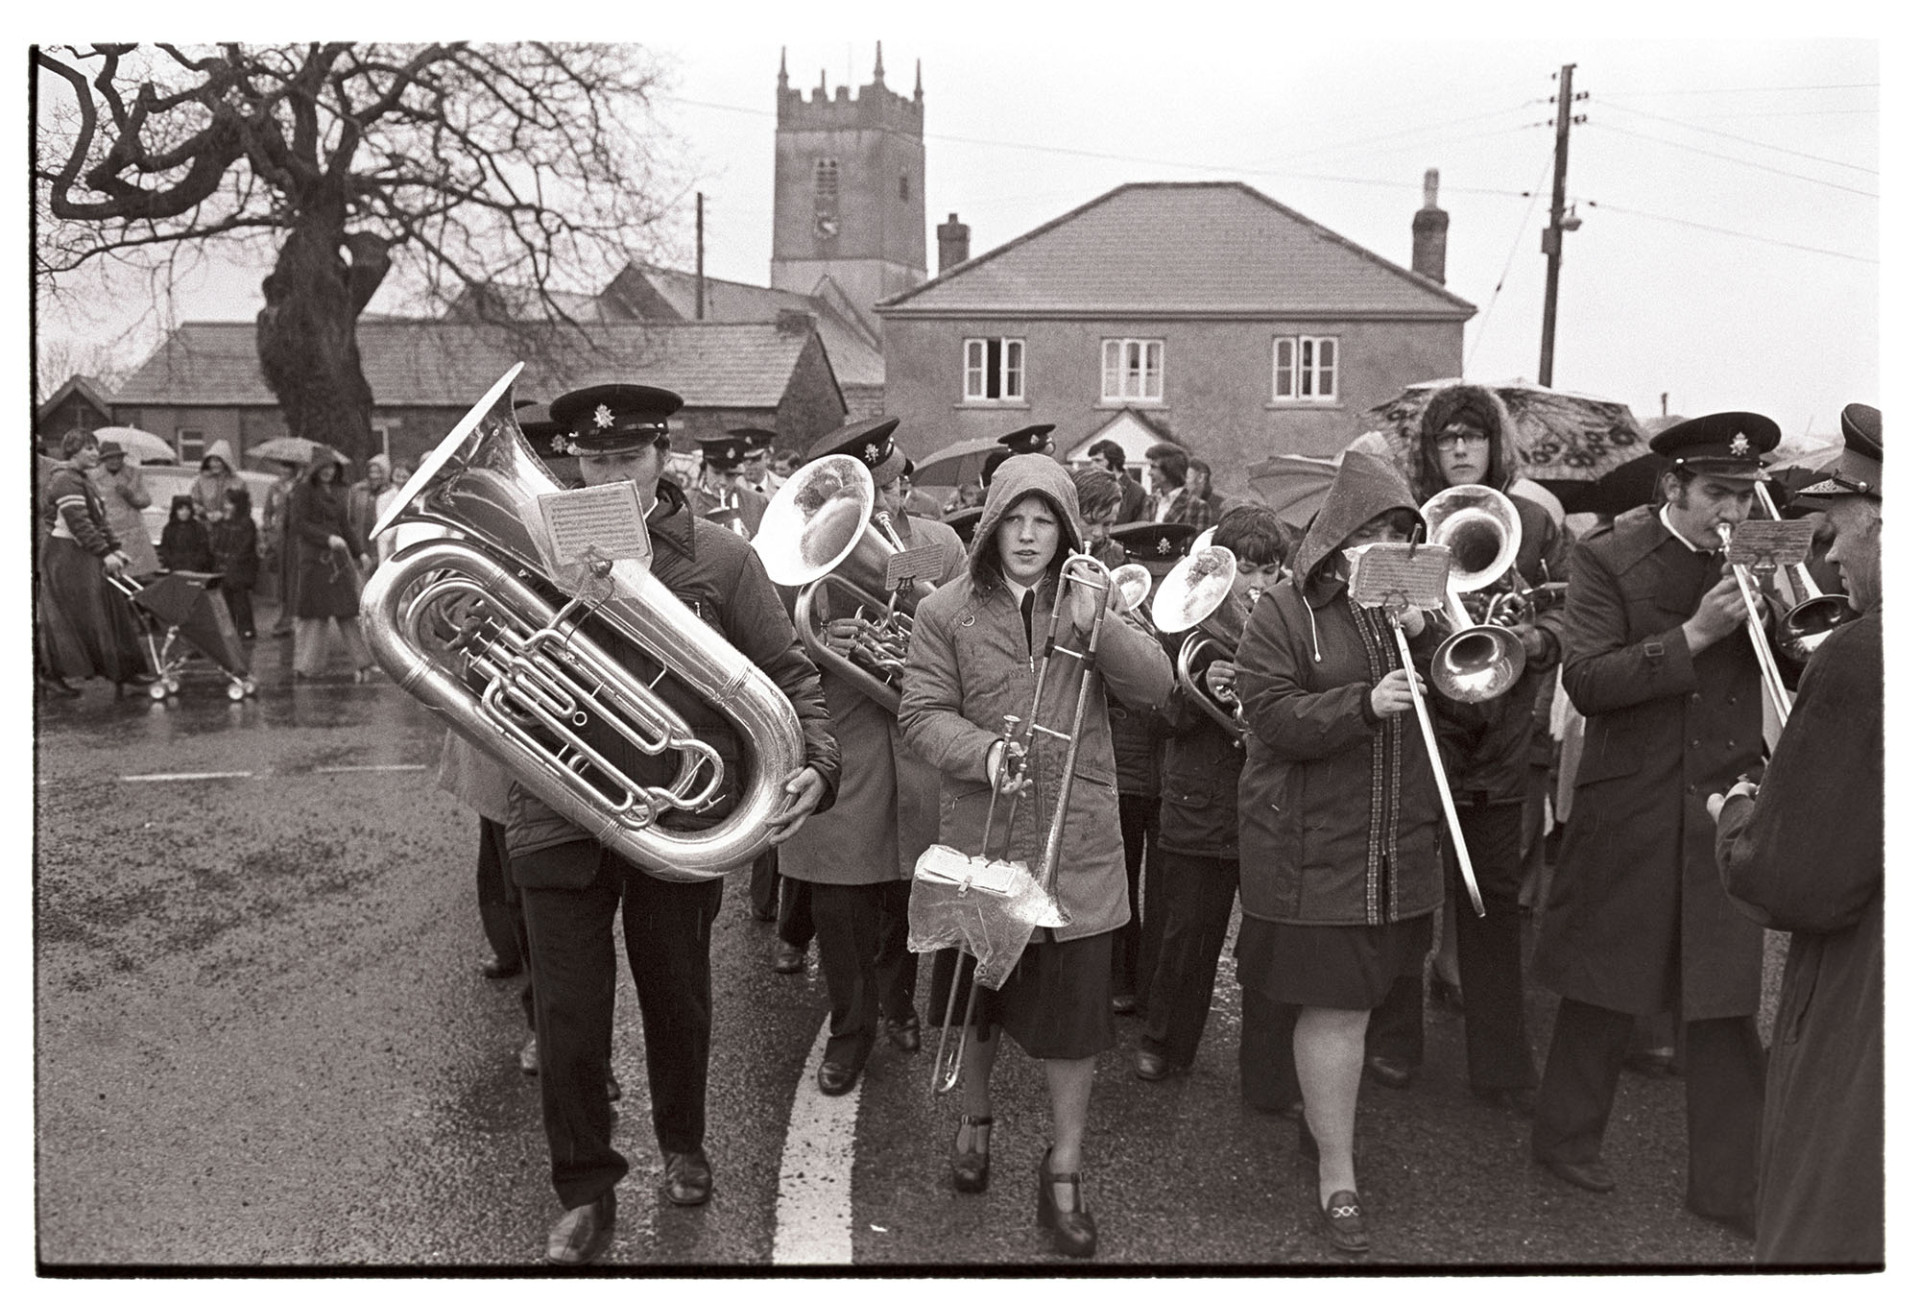 Brass band at carnival parade. 
[A brass band performing in the rain at Shebbear Carnival. The band might be Northlew Brass Band. Houses and the church tower is visible in the background.]